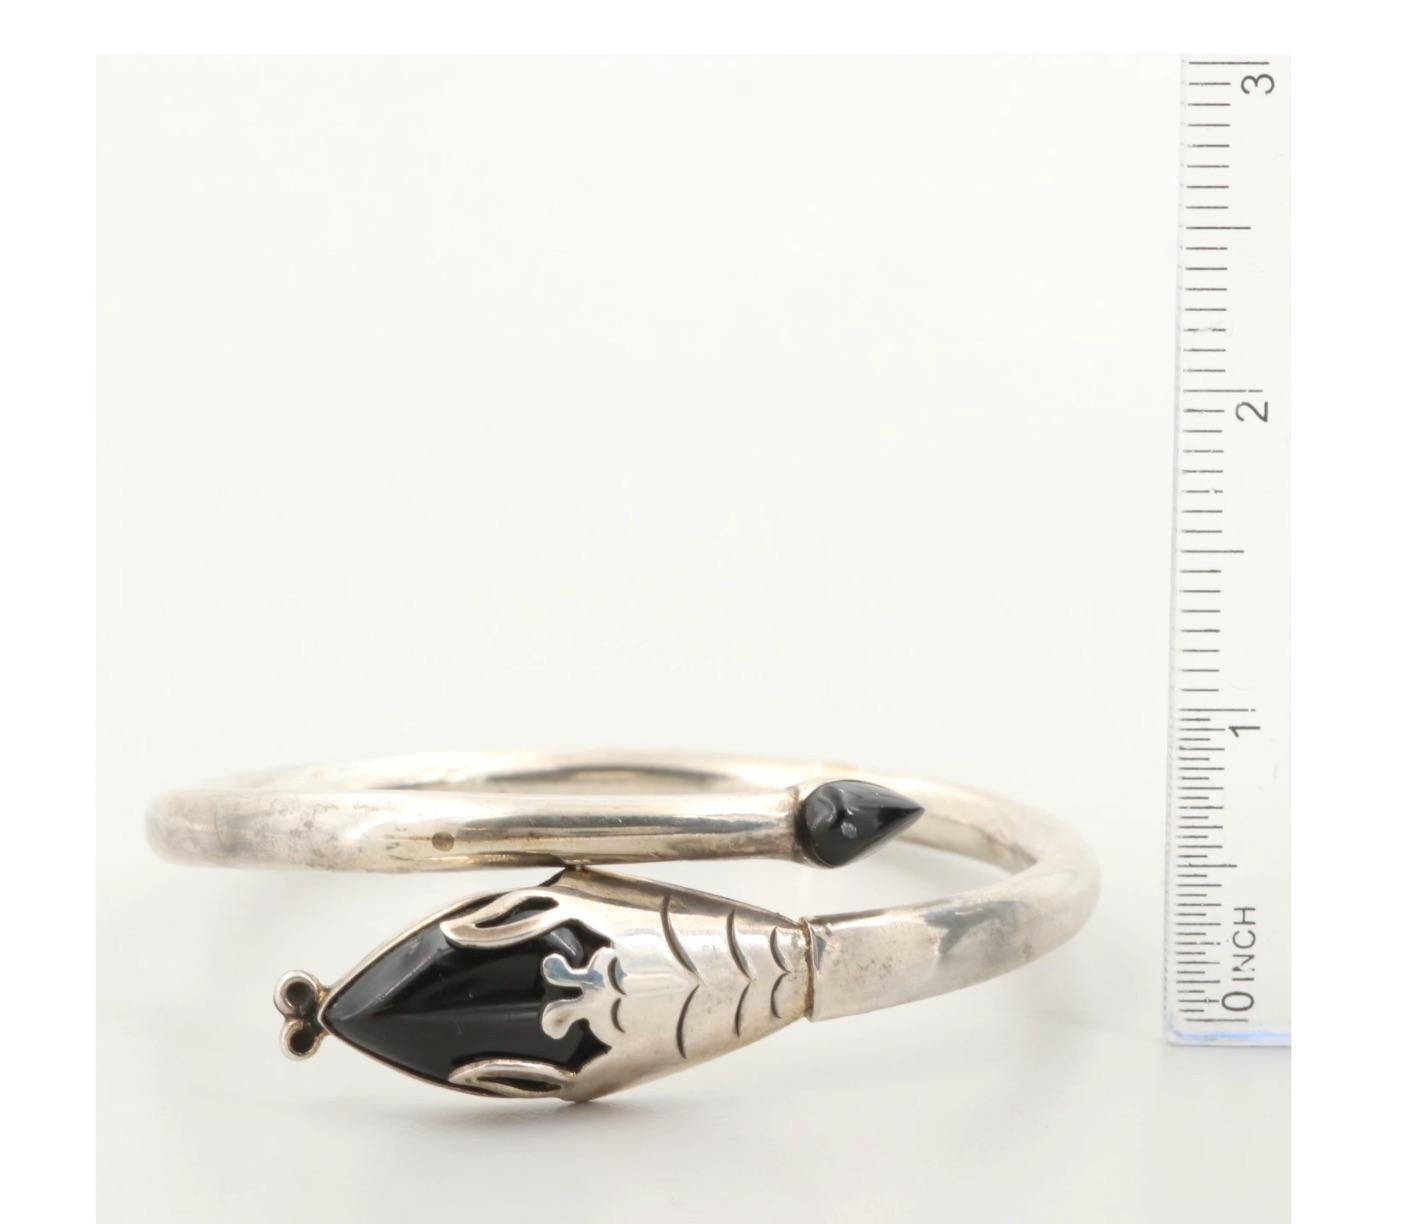 Exceptional 1980's Mexican Modern Sterling Silver and Obsidian Snake Bangle Bracelet is by the highly collectible Taxco silversmith known as Two Trees. 

Brilliantly handwrought, here the ancient image of Aztec deity Quetzalcoatl—the mythic 